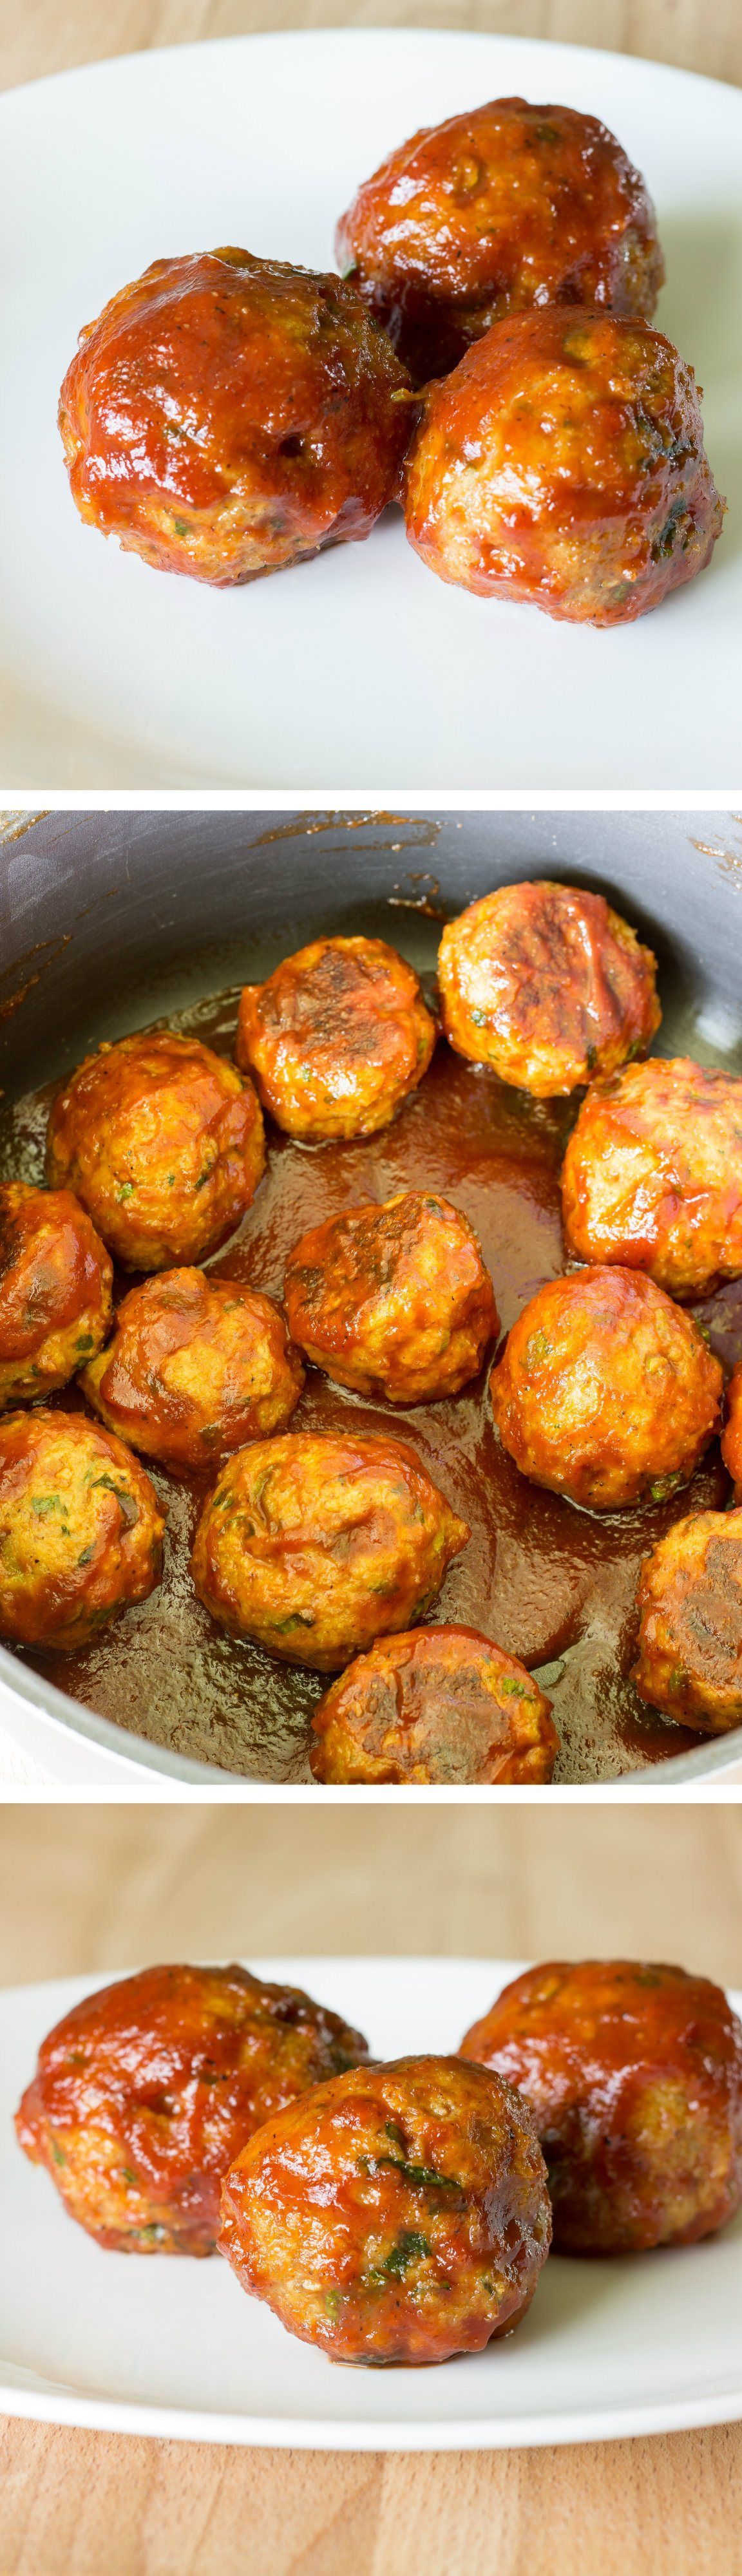 Honey Barbeque Chicken Meatballs – Flavorful chicken meatballs are baked, then simmered in a sweet & tangy homemade BBQ sauce.